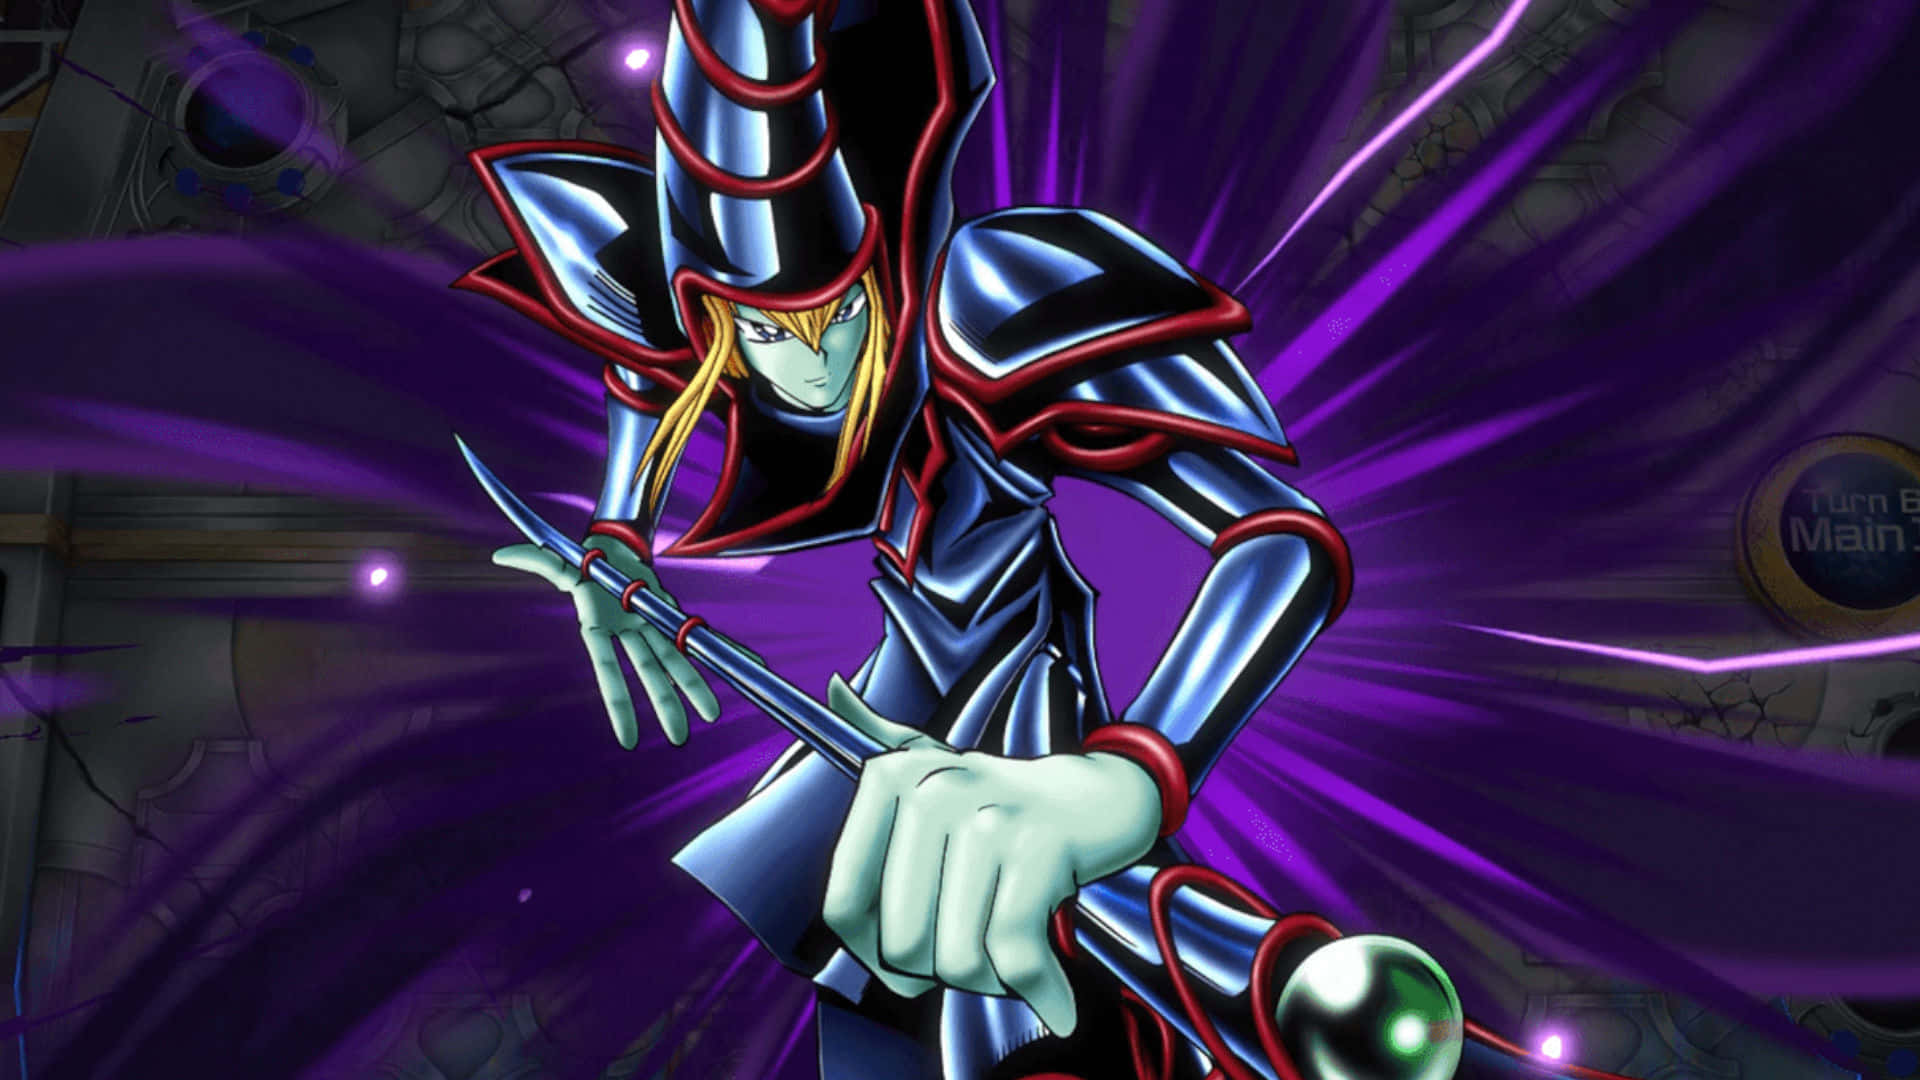 The powerful Dark Magician from Yu-Gi-Oh! strikes a pose. Wallpaper